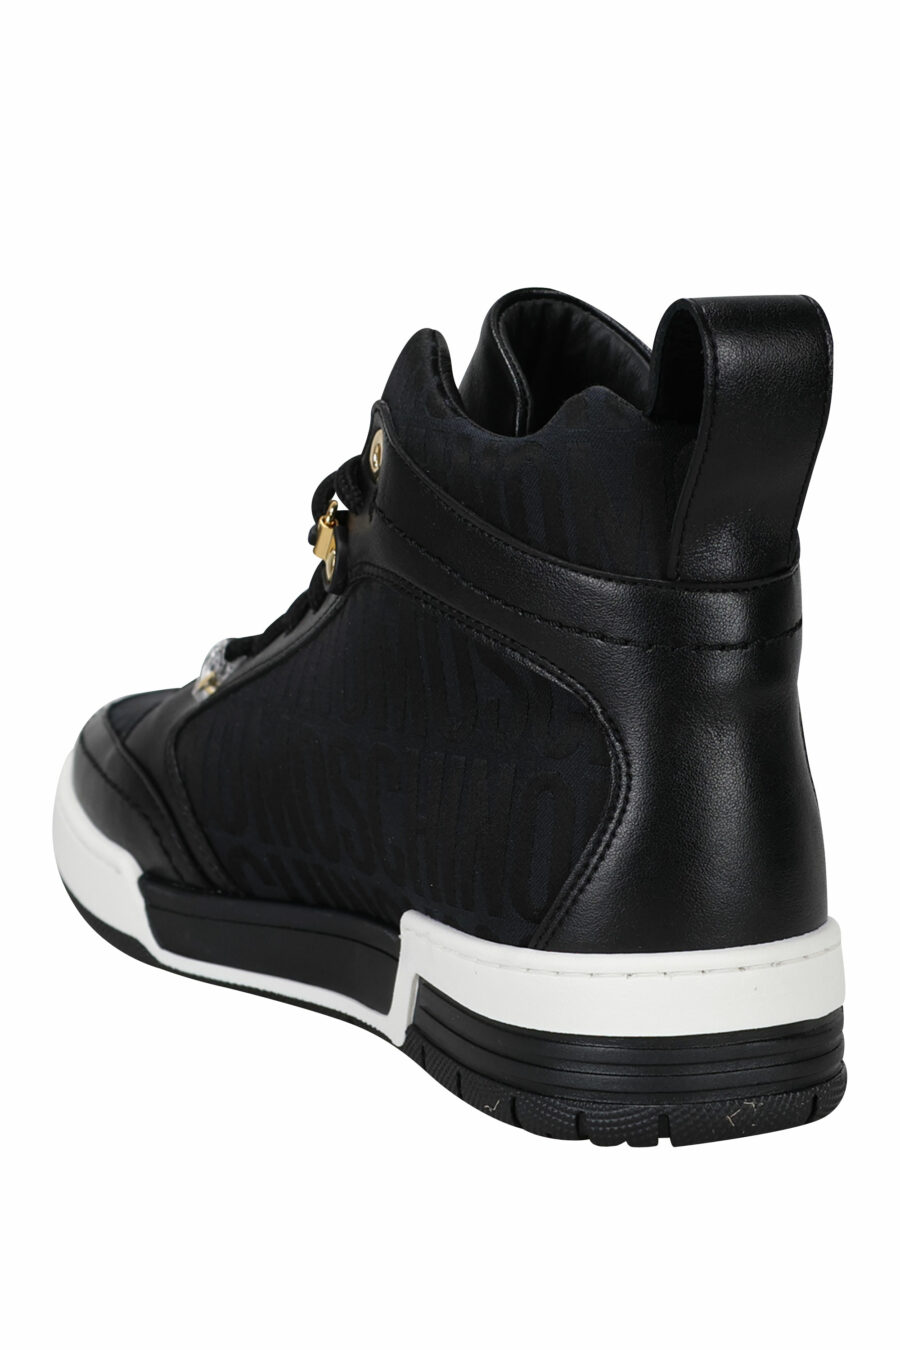 Black "all over logo" high top trainers with white sole - 8054653825758 3